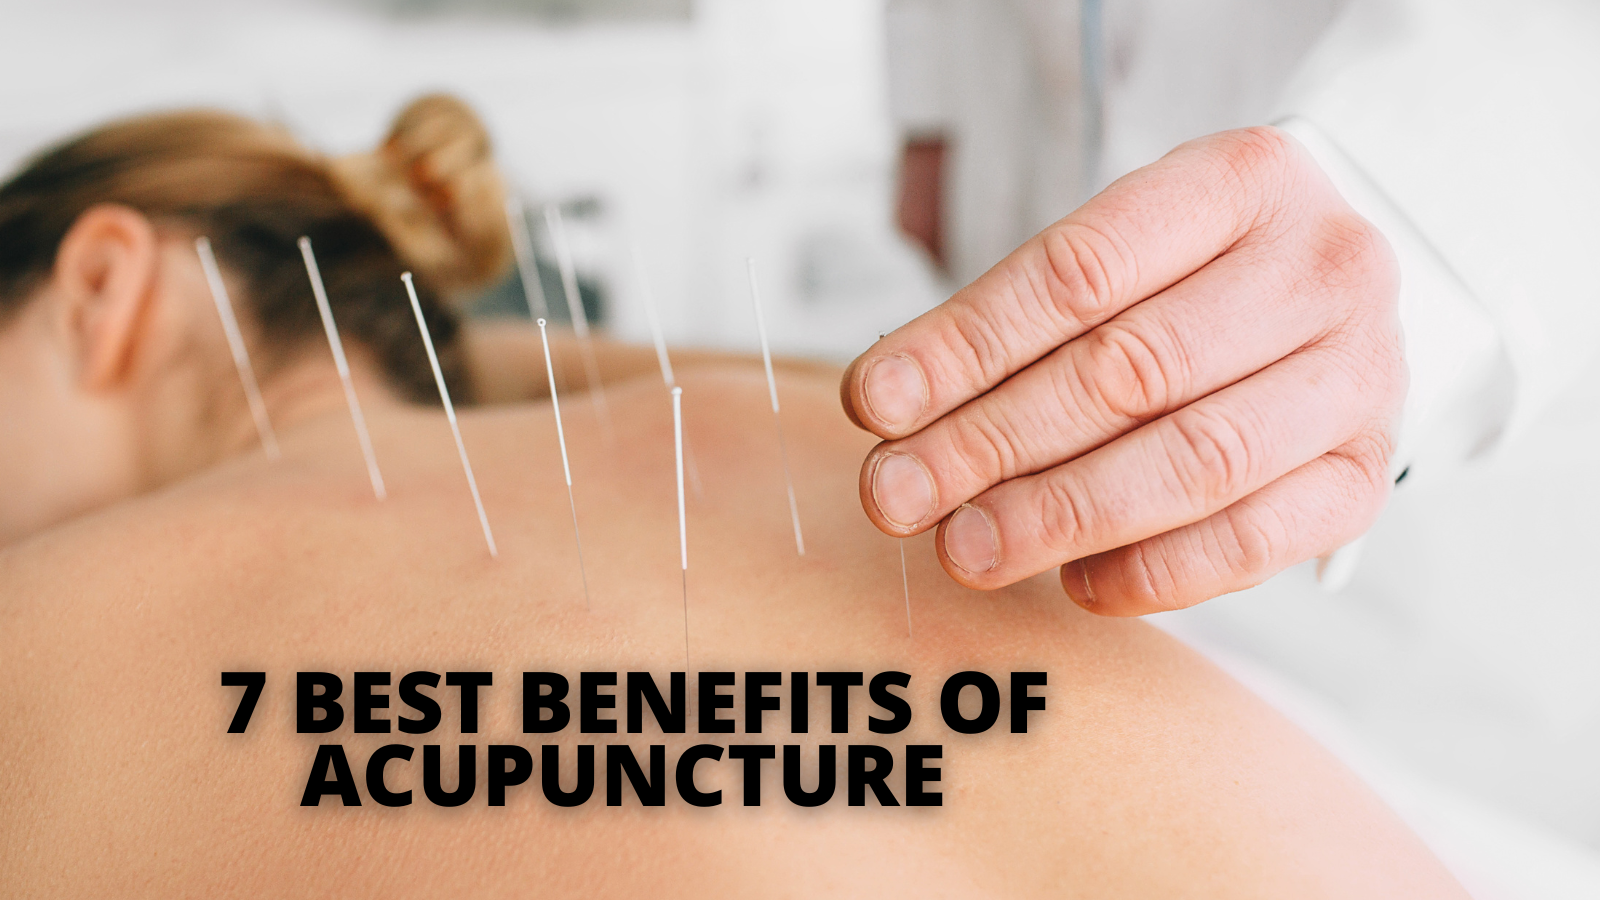 7 Best Benefits Of Acupuncture